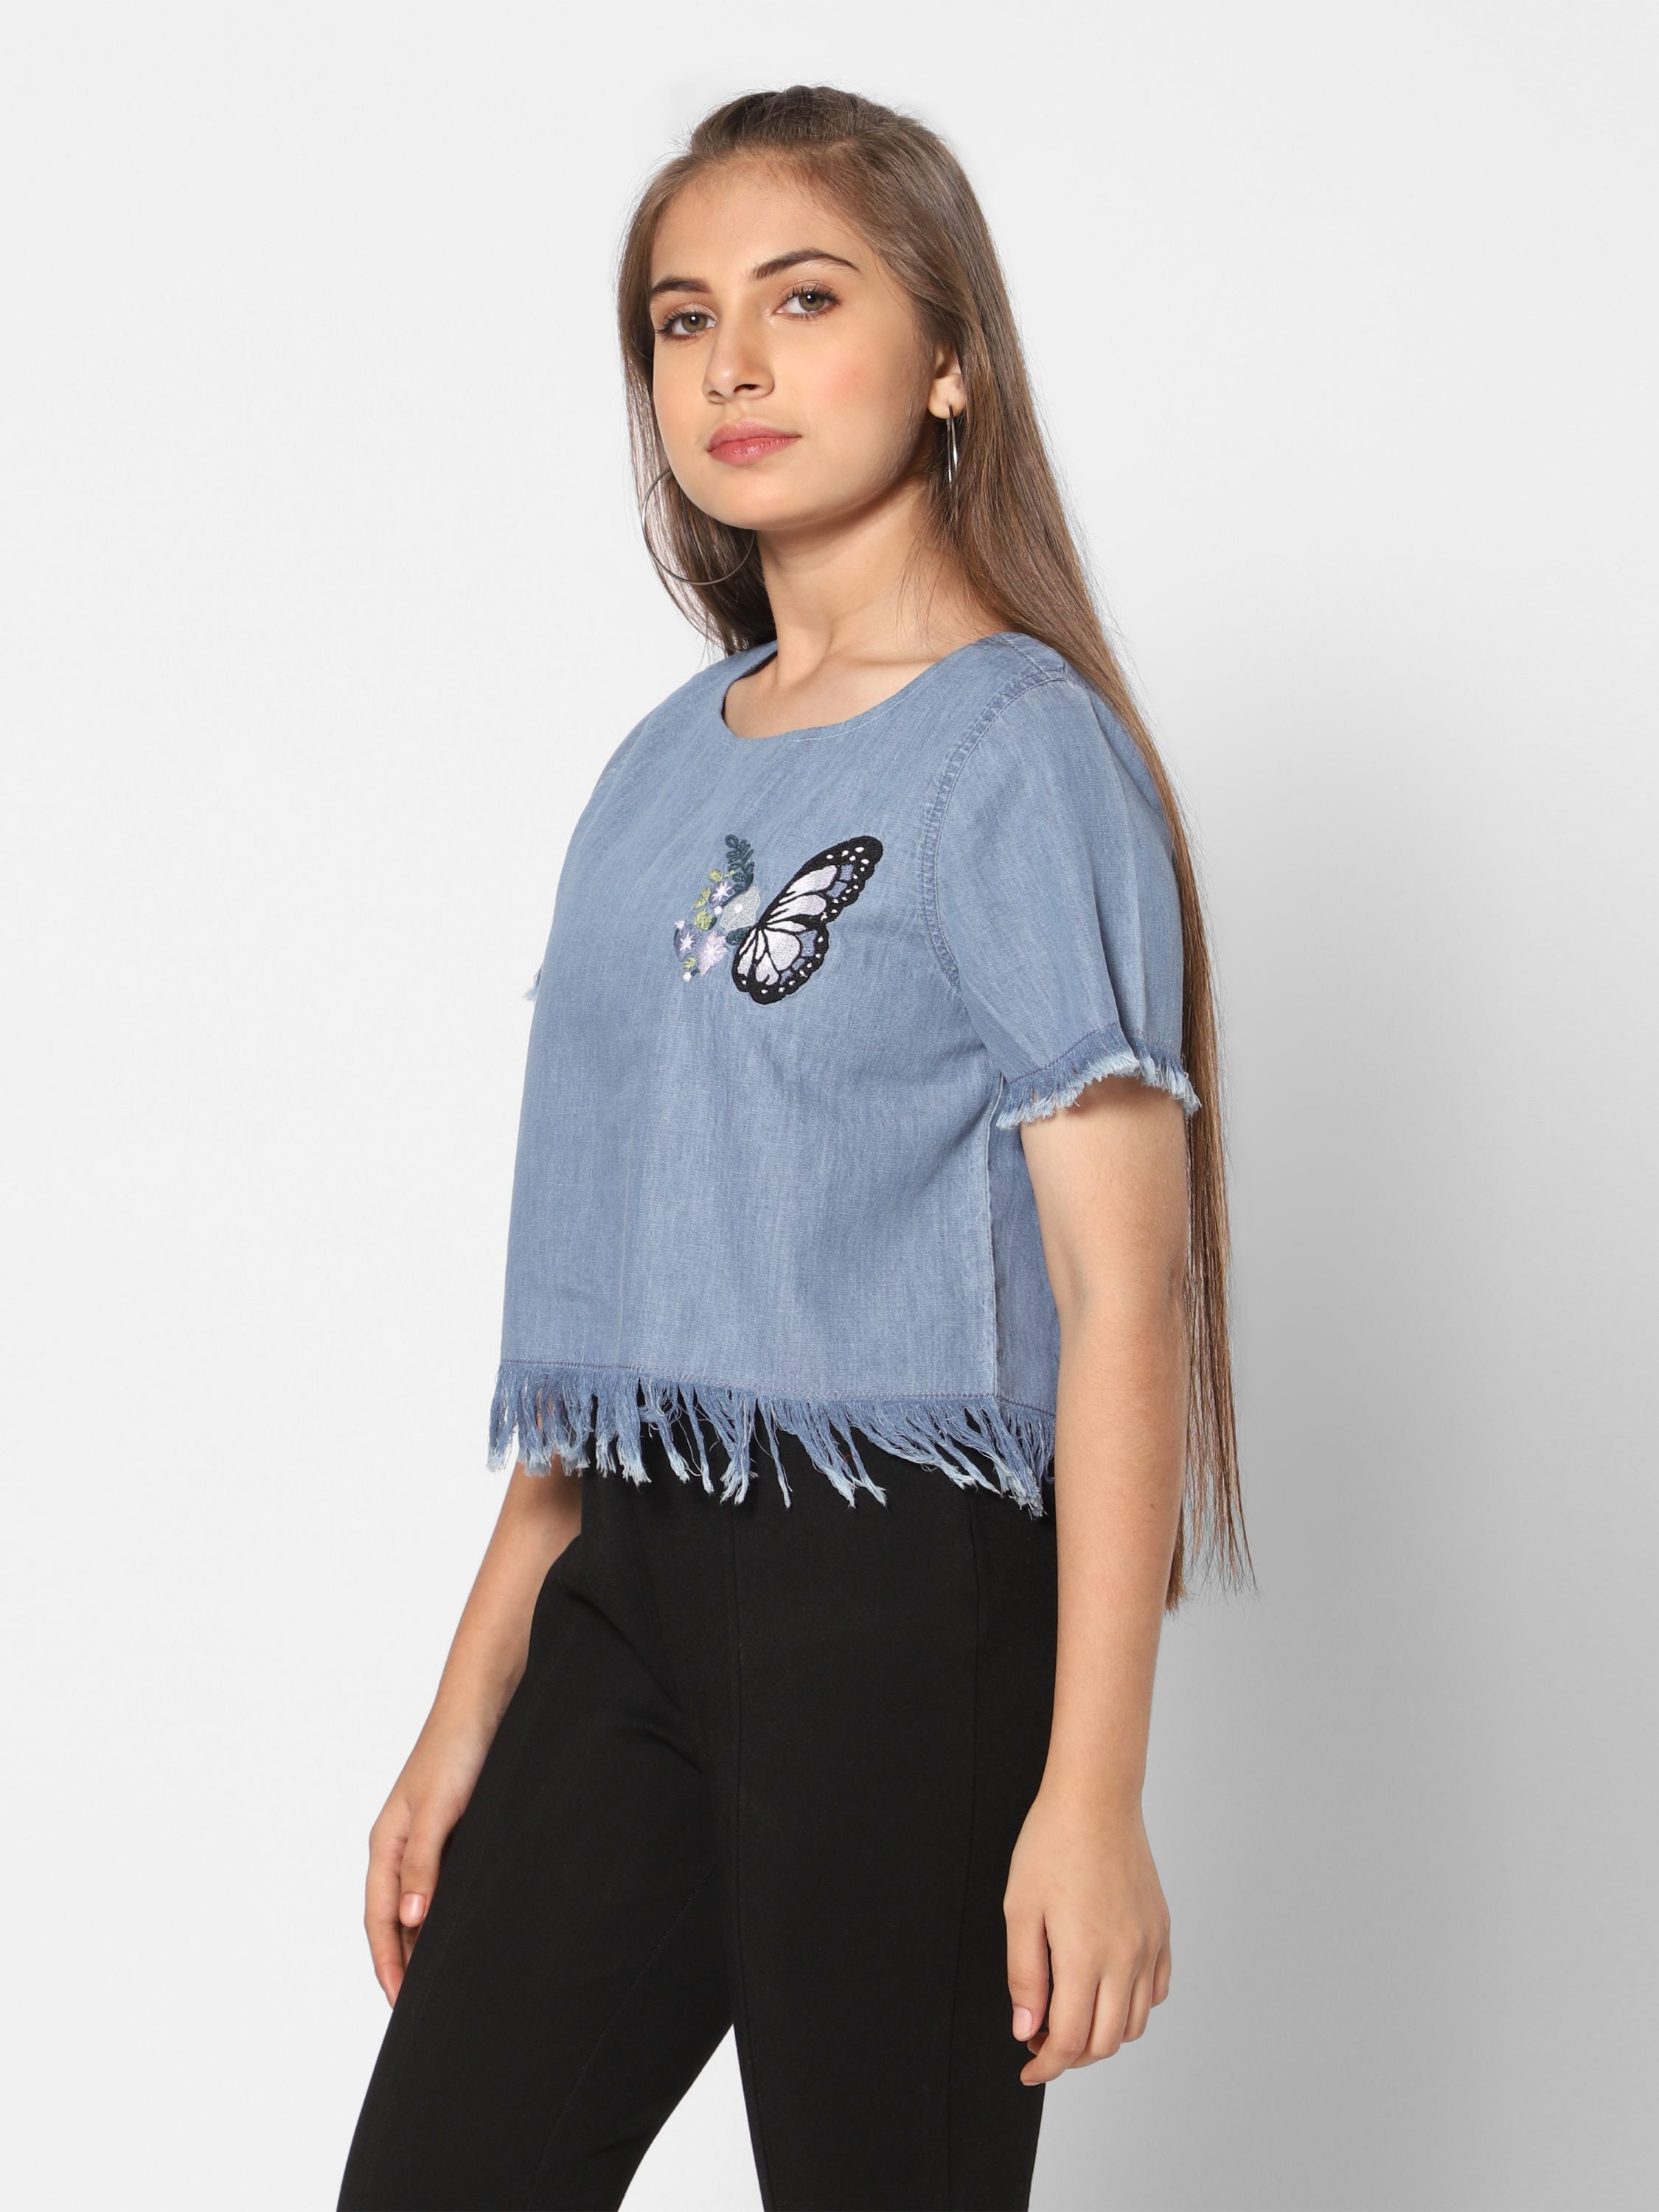 TeenTrums Girls Denim Woven Top with Butterfly Embroidery-Blue